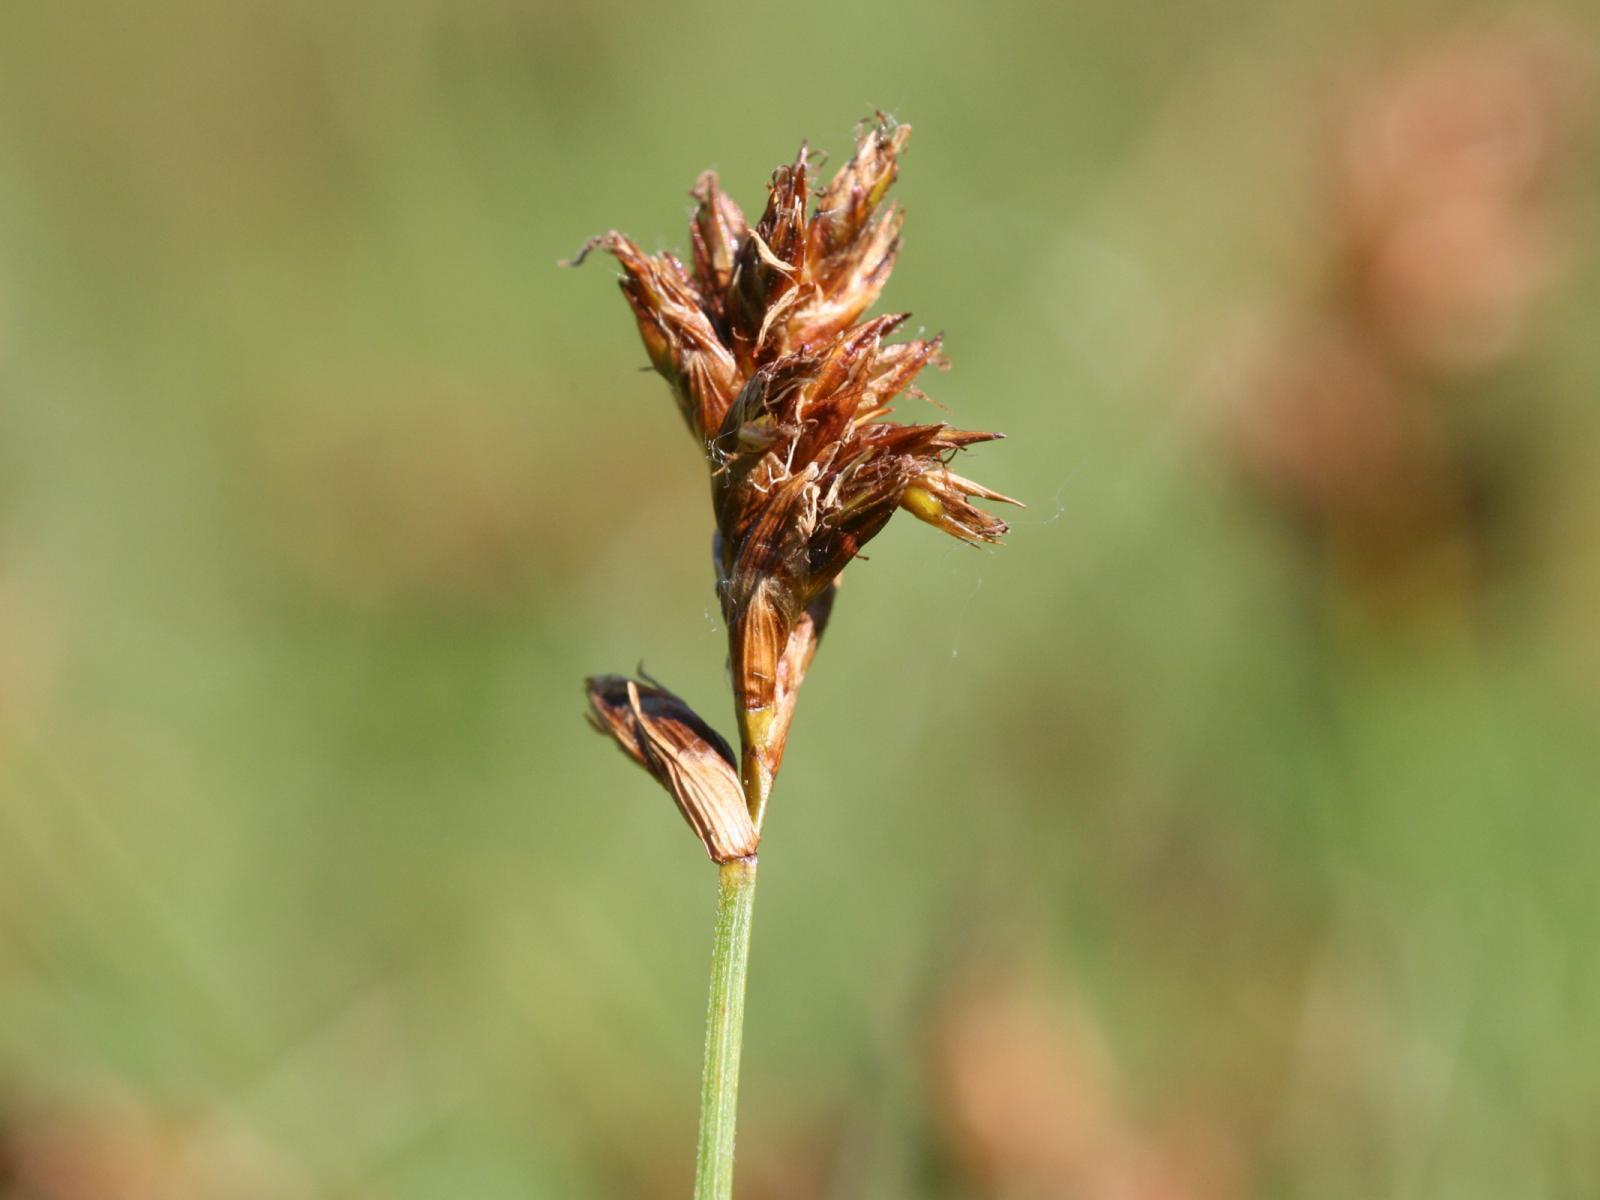 beige-brown spikelets with light-green stem